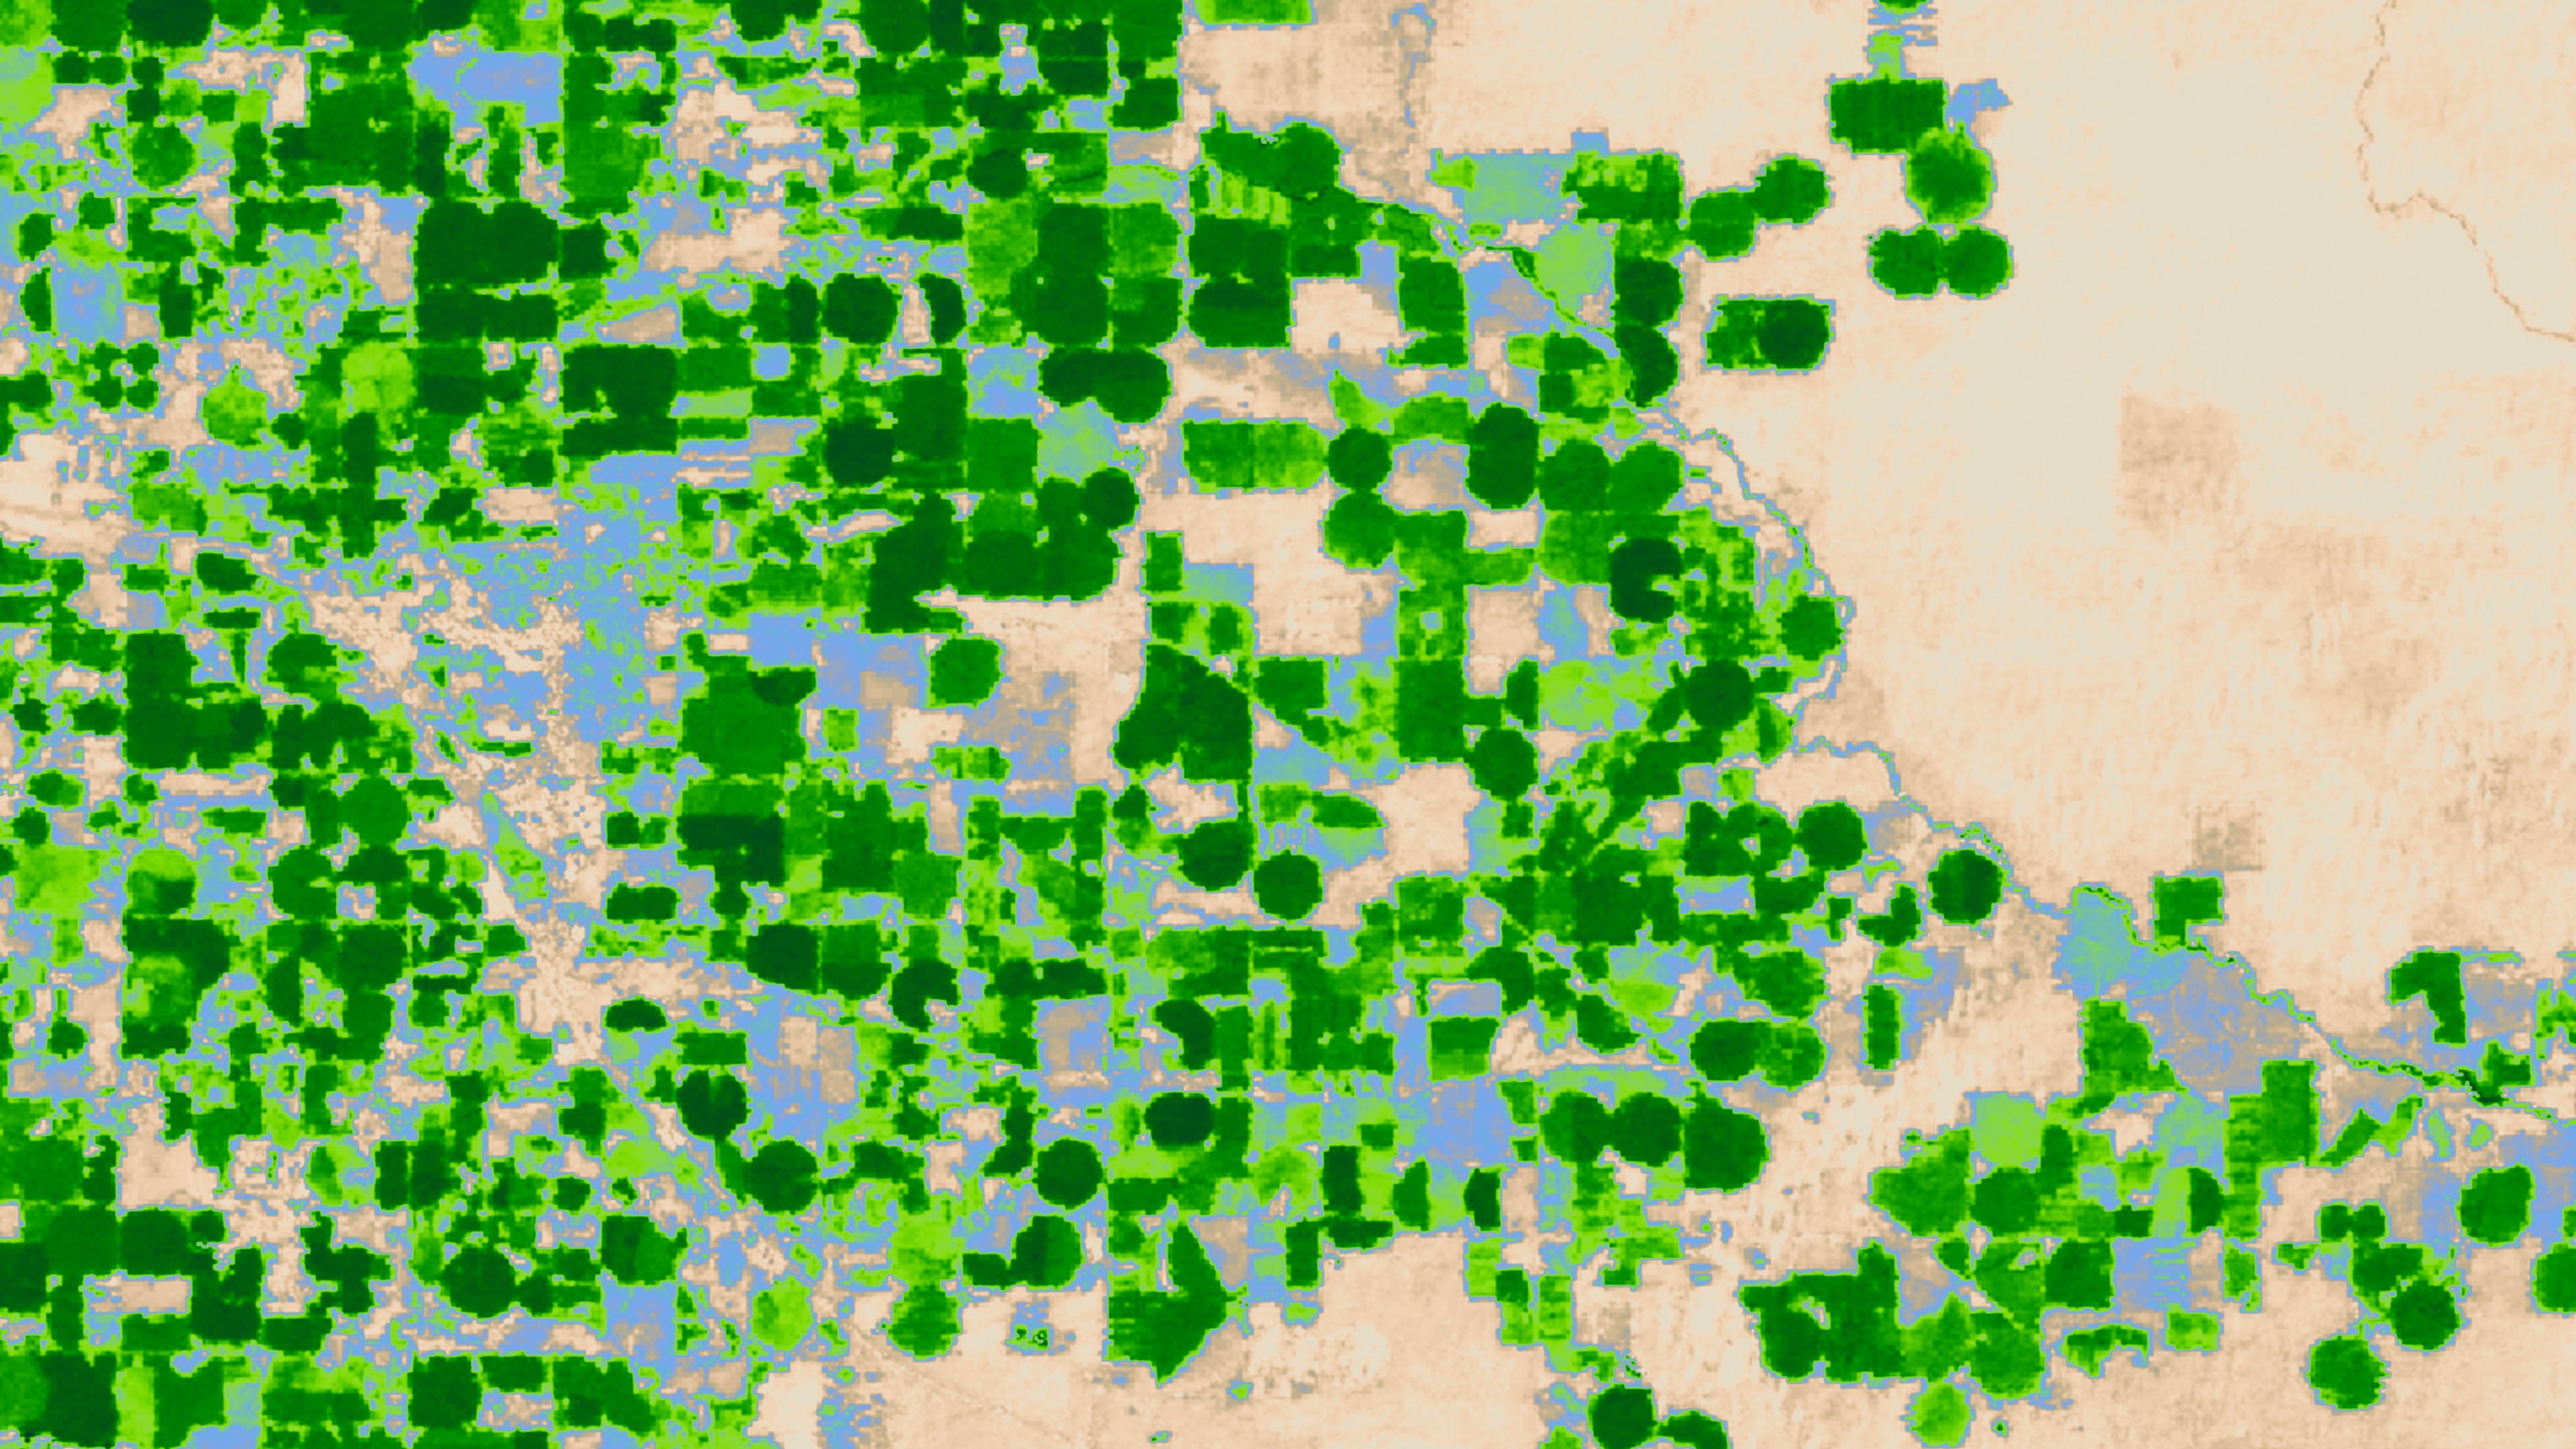 In this animation, the first image shows an agricultural region in Idaho on August 14, 2000, captured in the visible spectrum. The round, green circles are irrigated farm fields. The second image, using Landsat's thermal band, depicts cooler and warmer areas. Irrigated fields appear cooler because evapotranspiring water absorbs energy and cools the fields. The thermal image dissolves into a map of evapotranspiration, created using the METRIC tool.